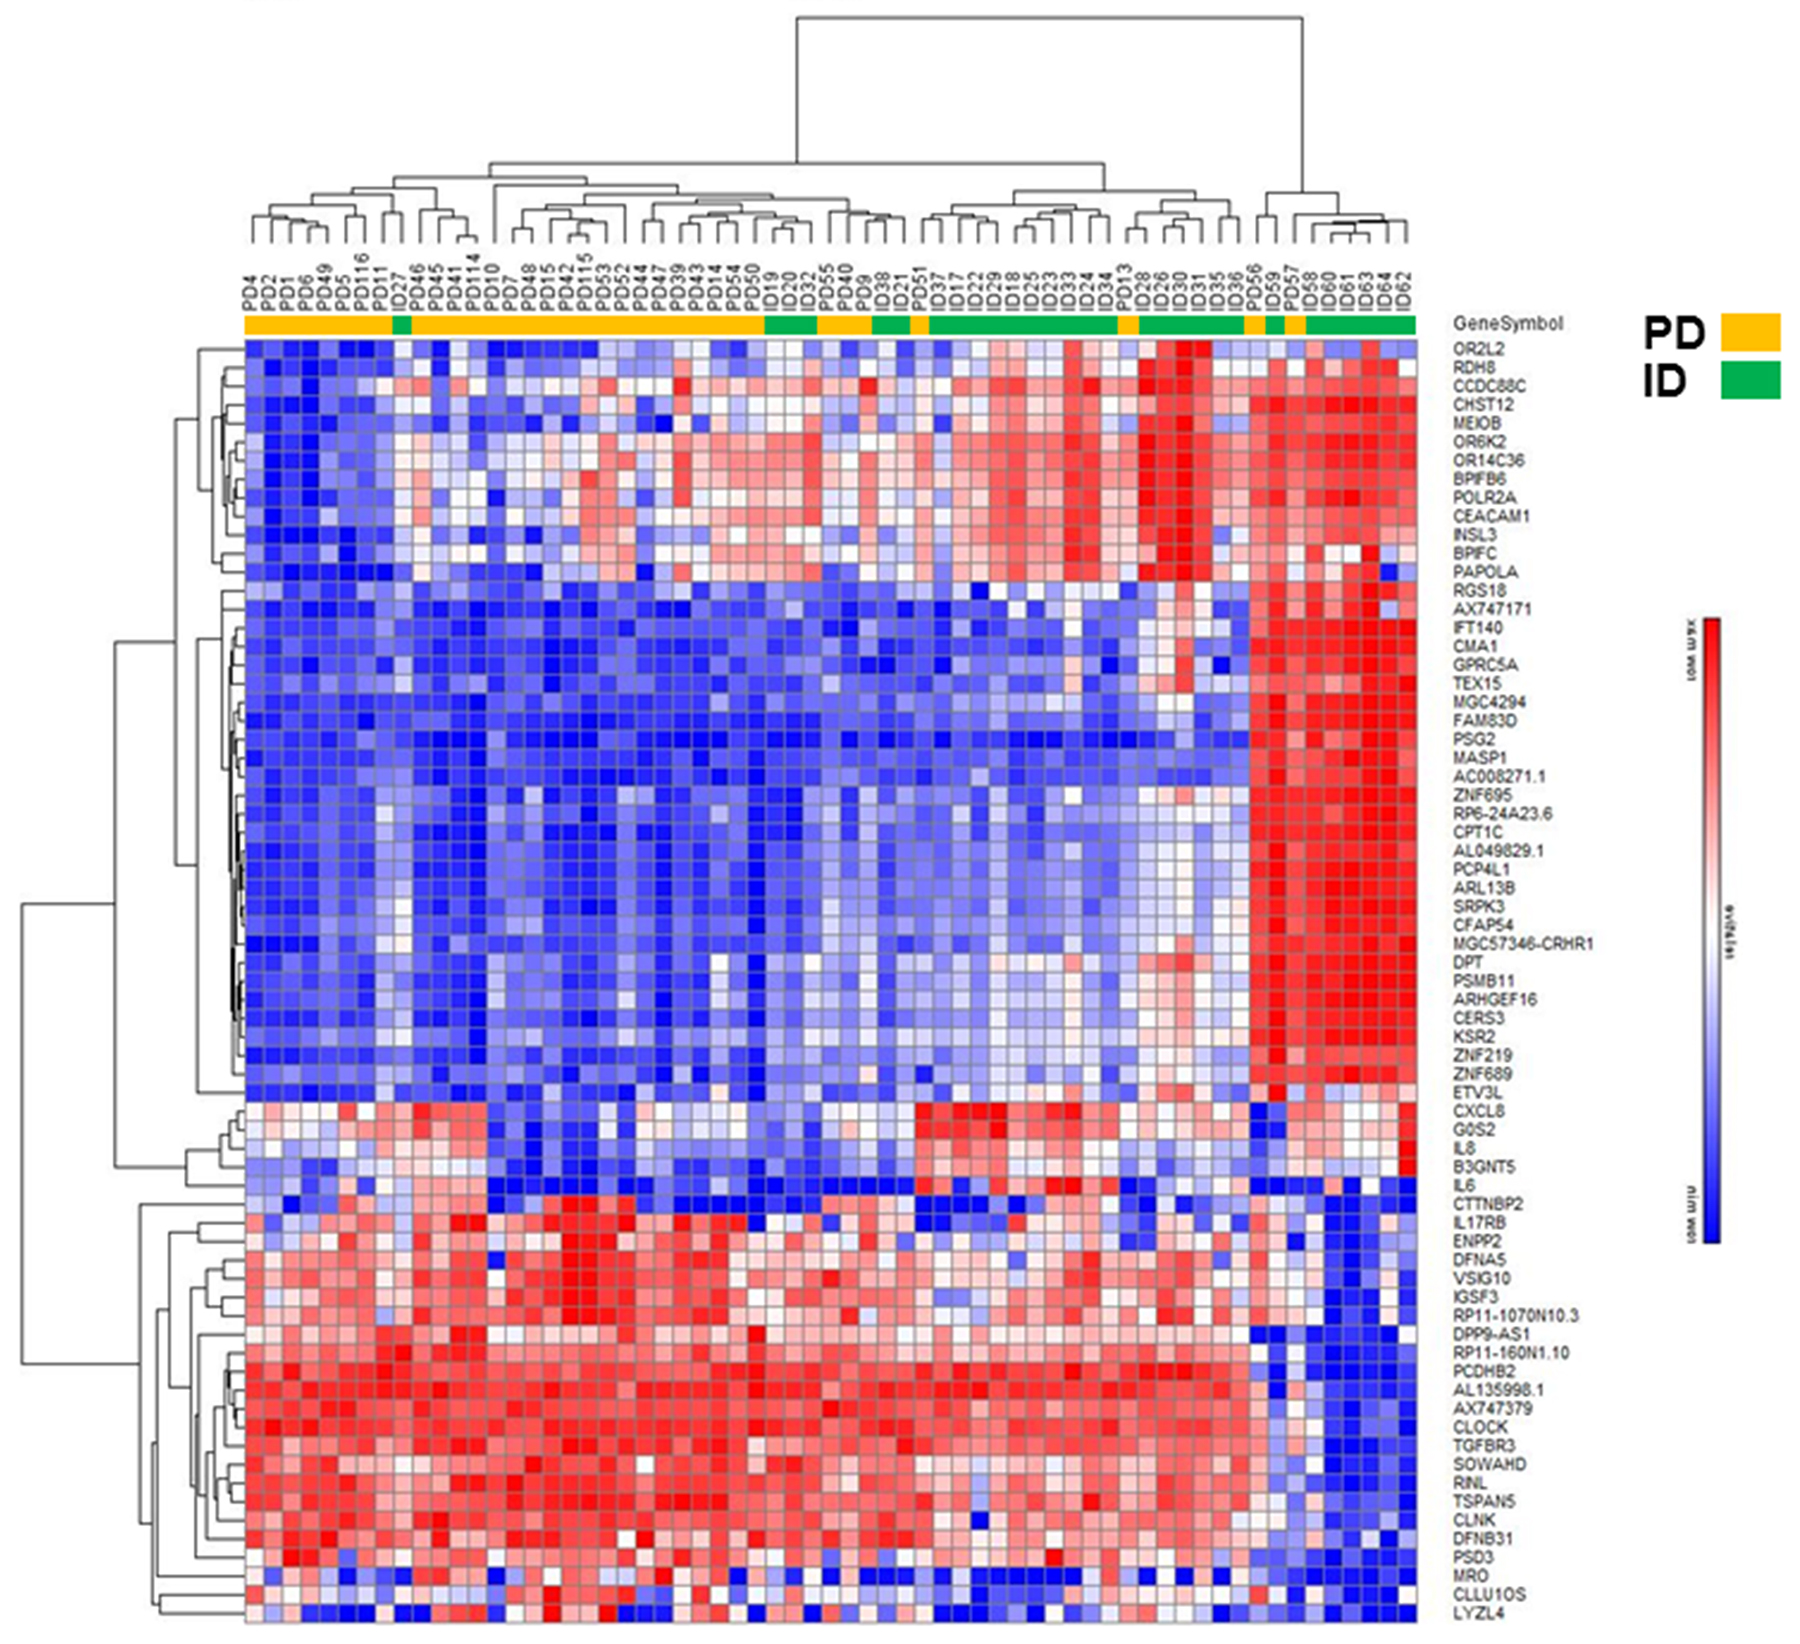 Hierarchical clustering analysis of differentially expressed mRNAs in PD vs ID early stage CLL.